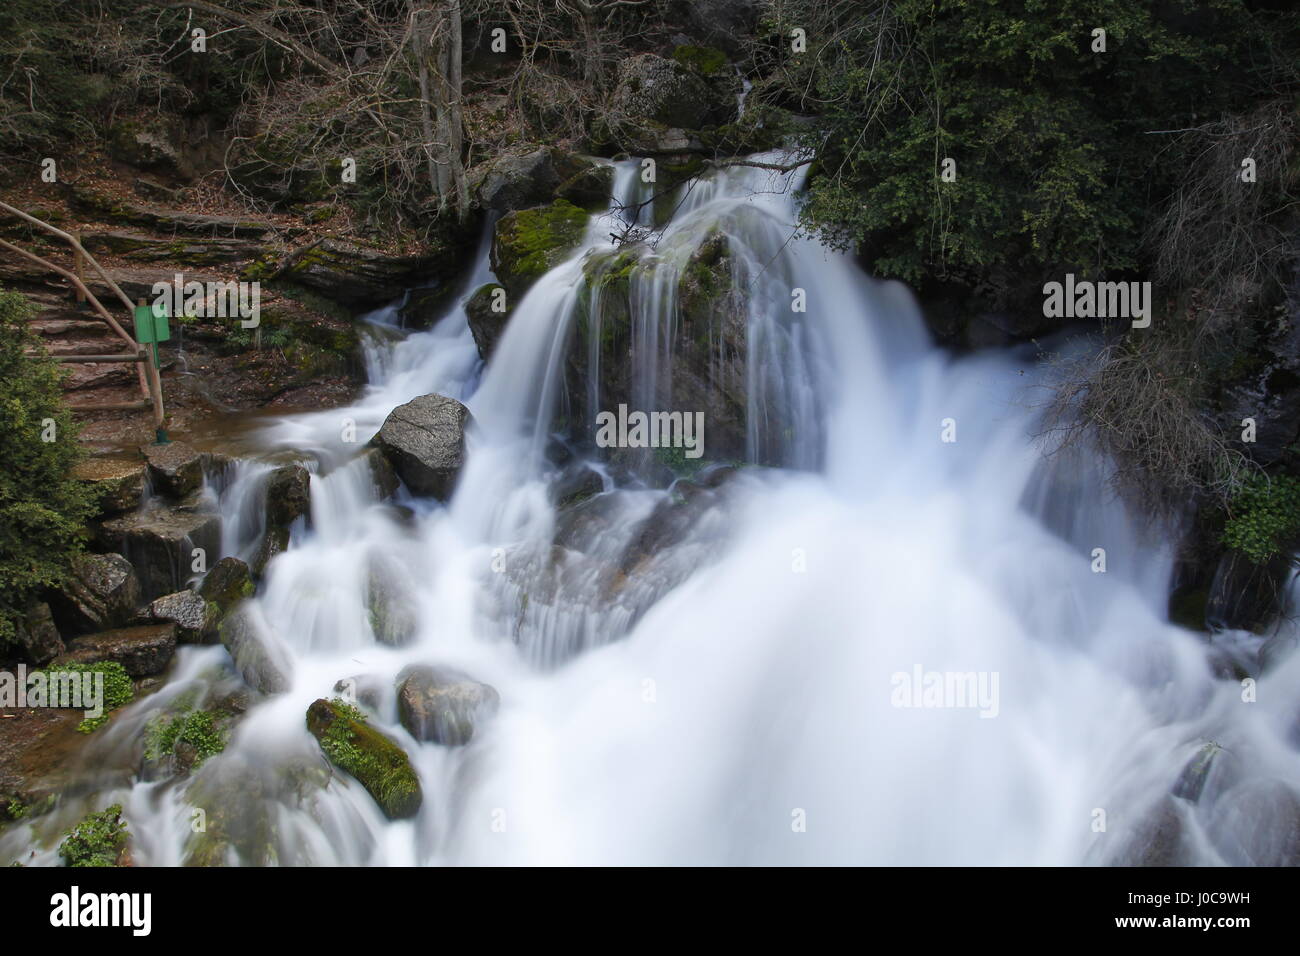 Llobregat river origin, with water flowing from the rocks Stock Photo